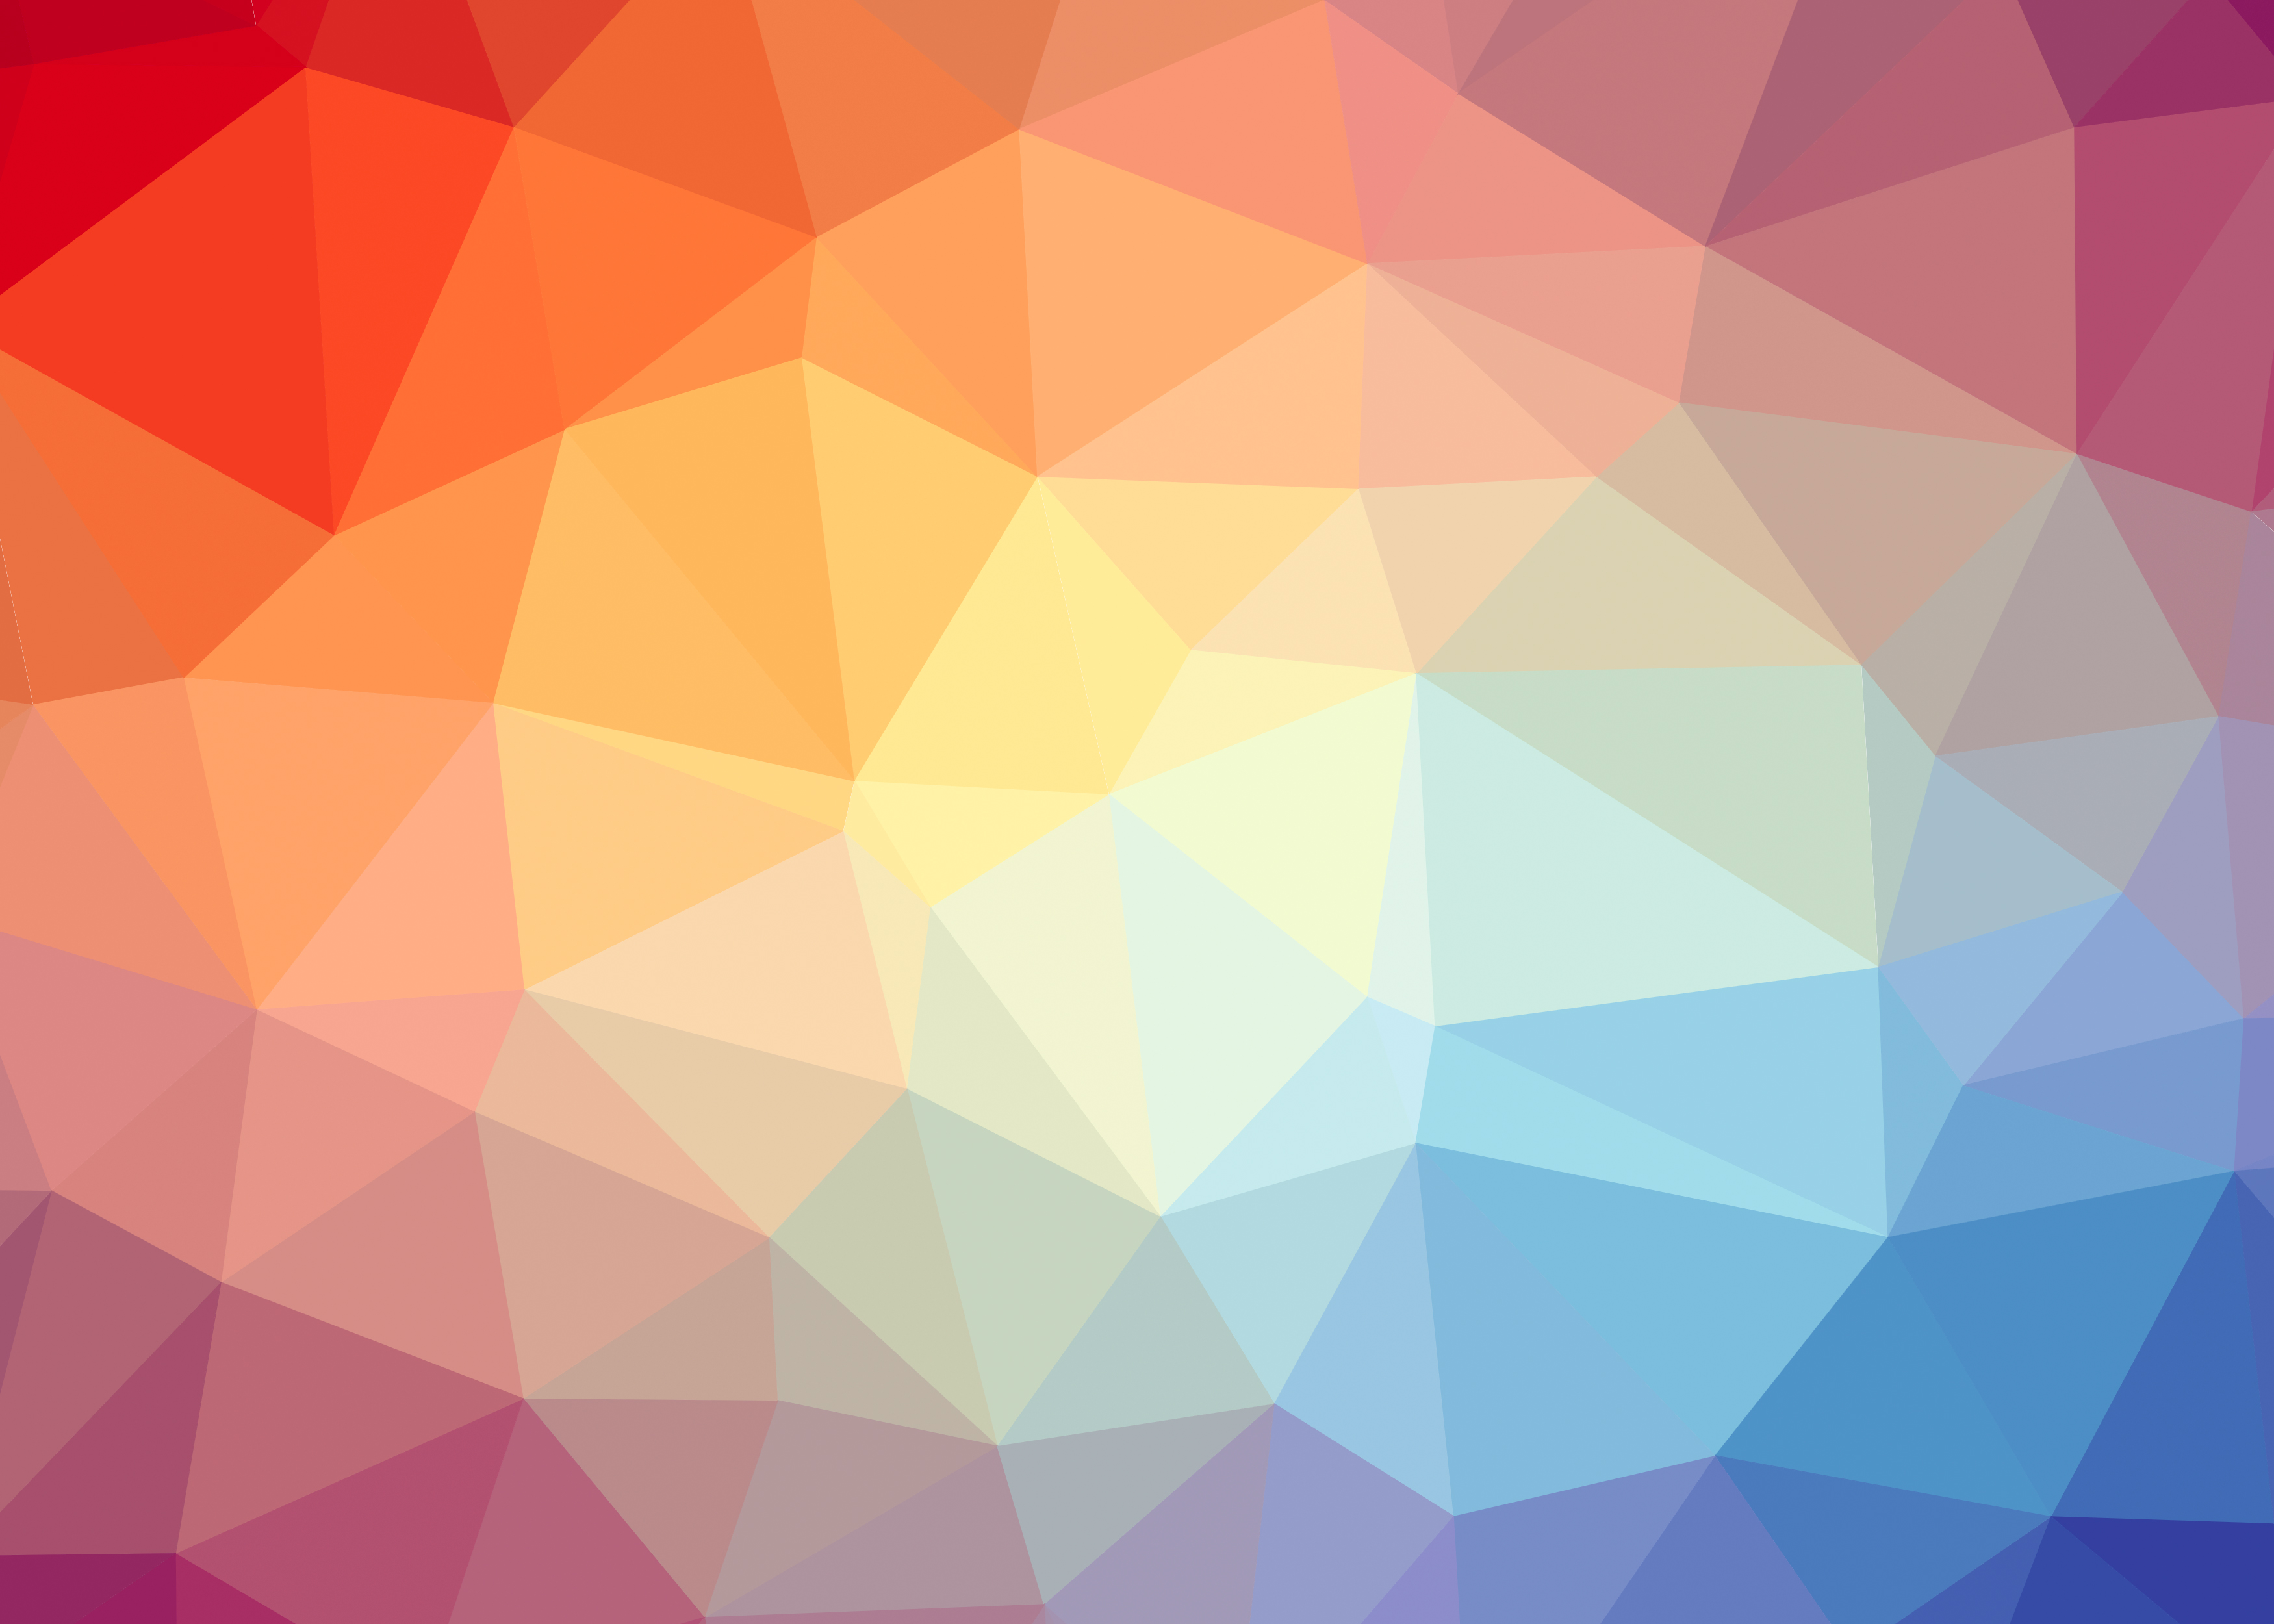 Download Abstract Geometric Wallpaper | Free Stock Photo and Image